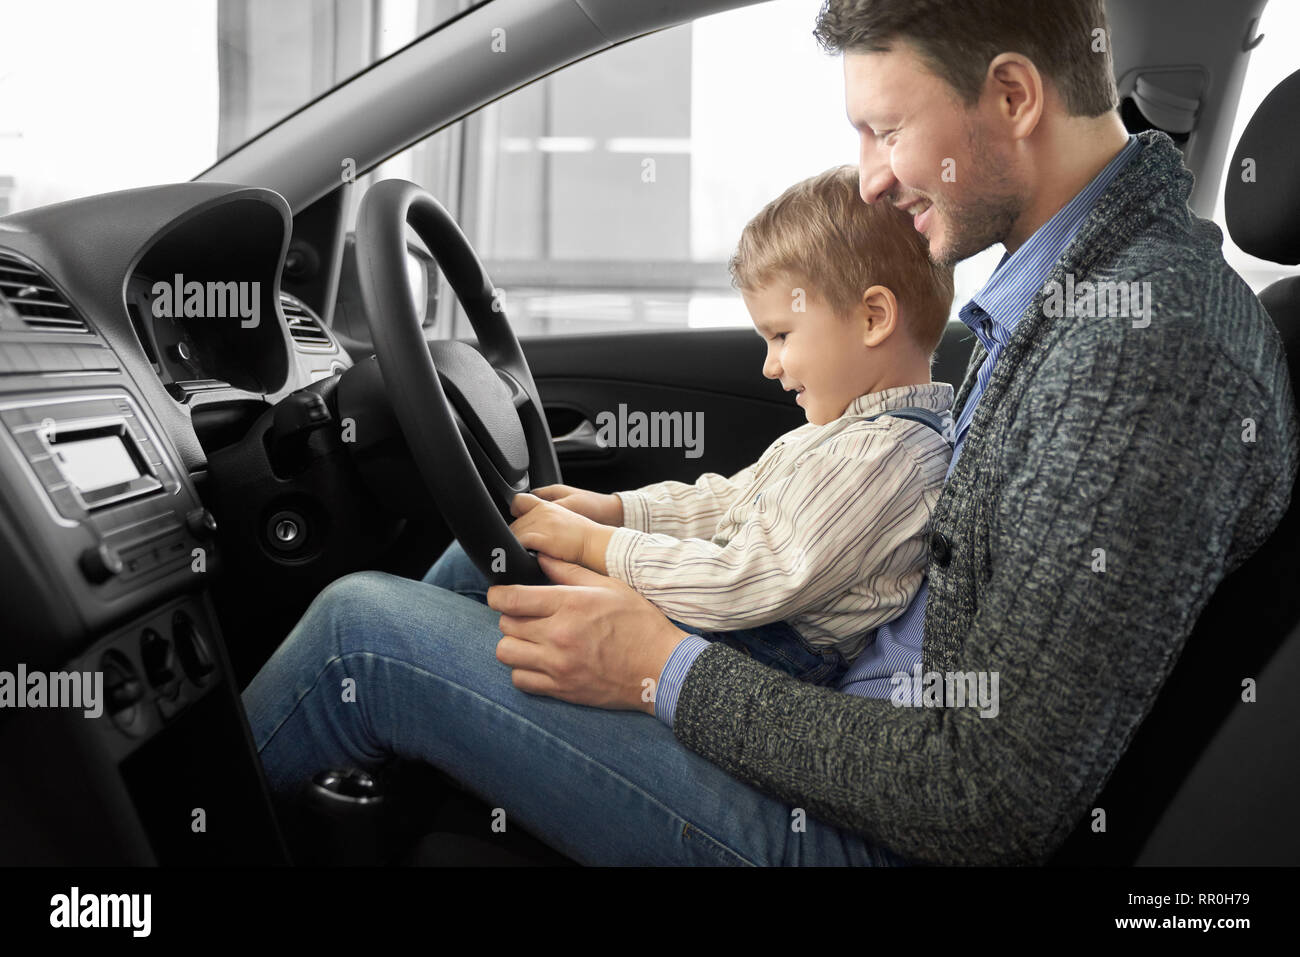 Father holding son on knees, man sitting in driver's seat of new expensive car. Parent showing to kid car cabin, steering wheel. Happy family observing automobile, smiling. Stock Photo